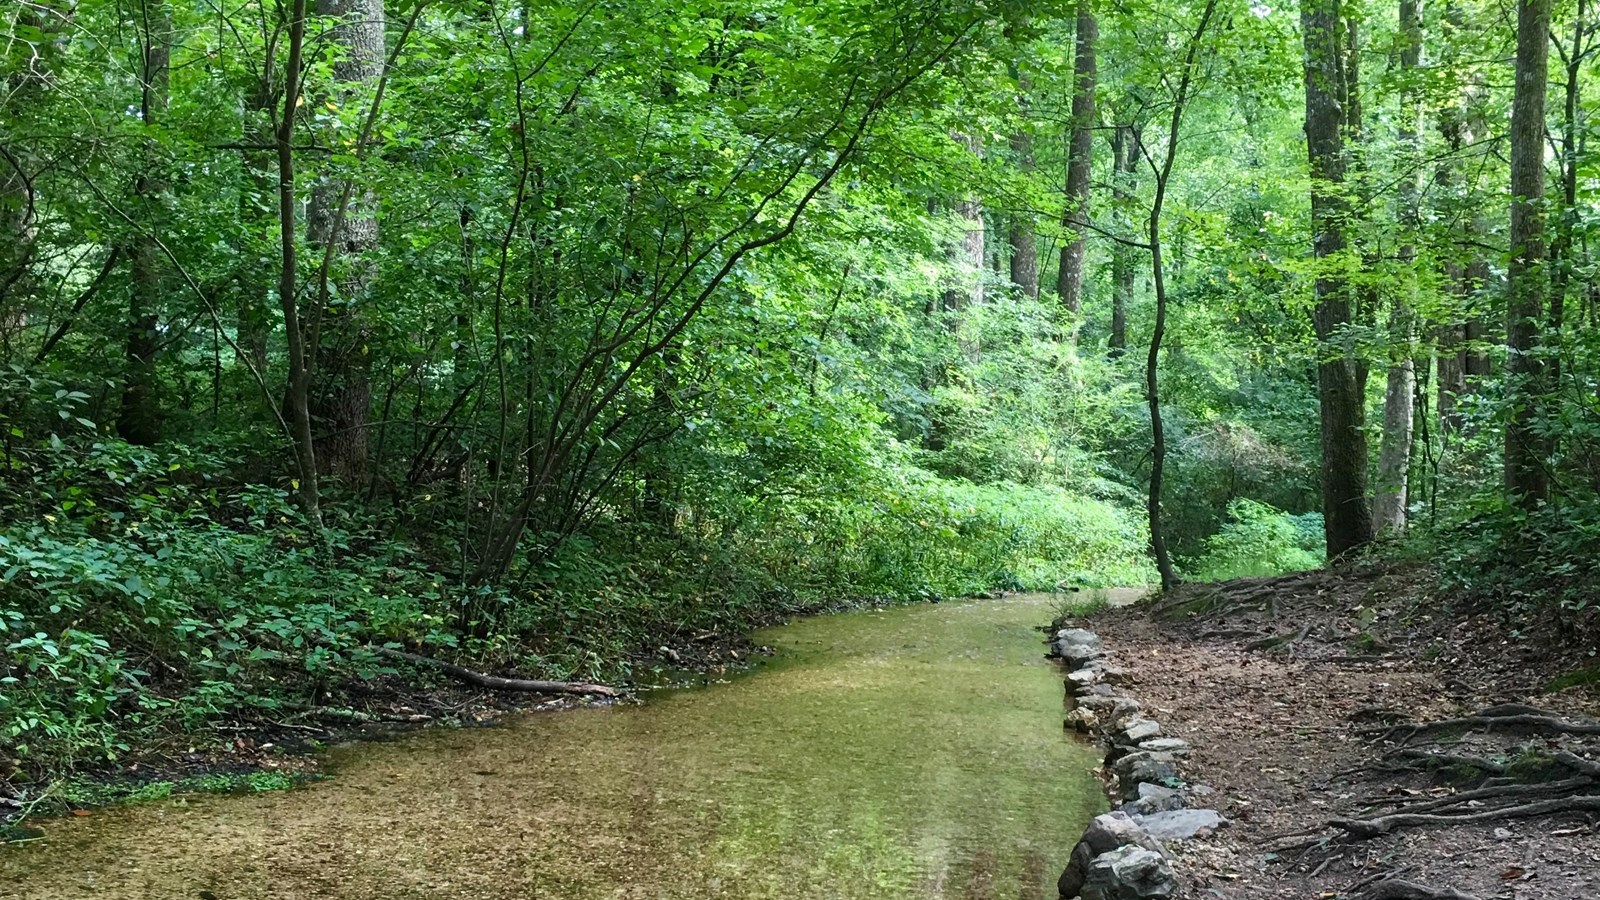 A clear creek runs next to a path, in a bright green, thick forest.